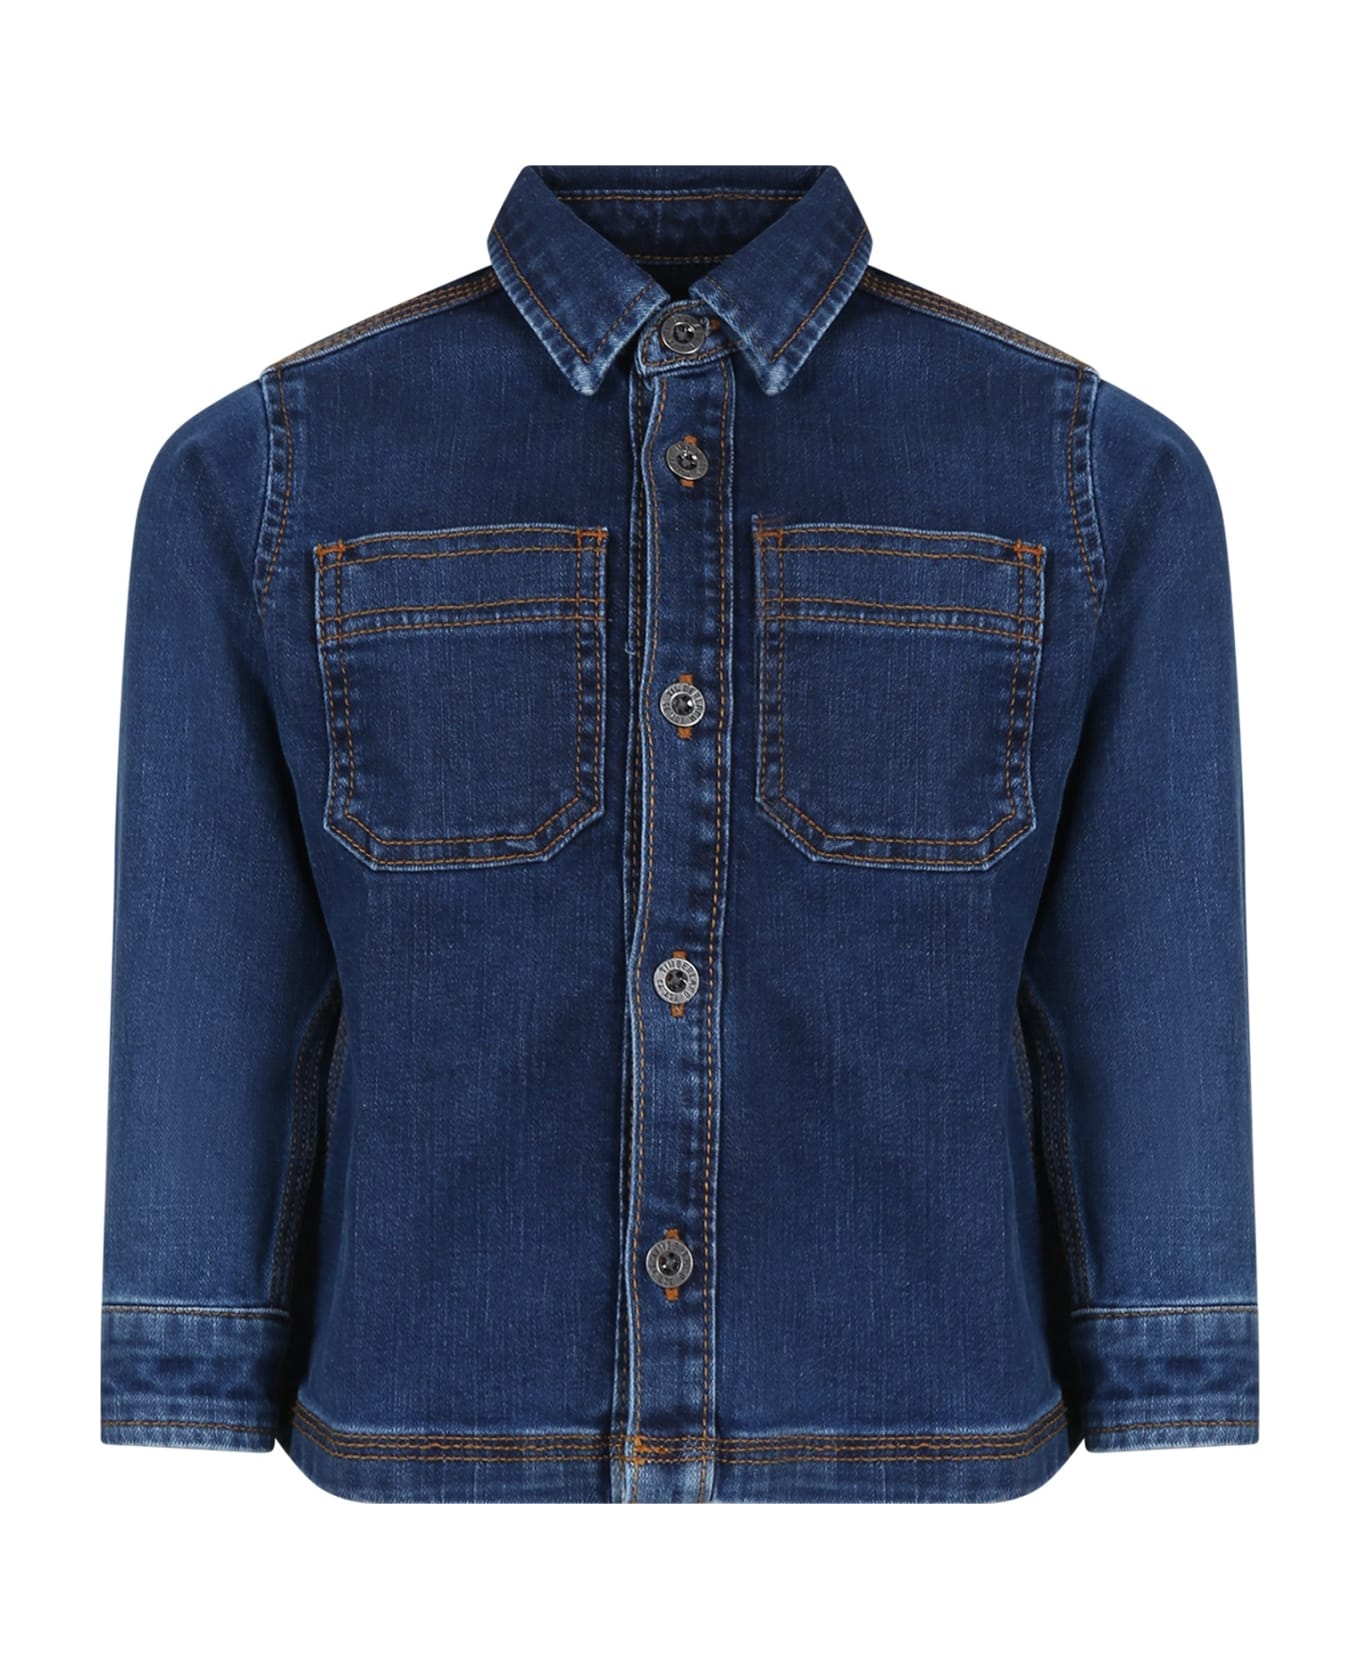 Timberland Blue Shirt For Boy With Patch - Denim シャツ